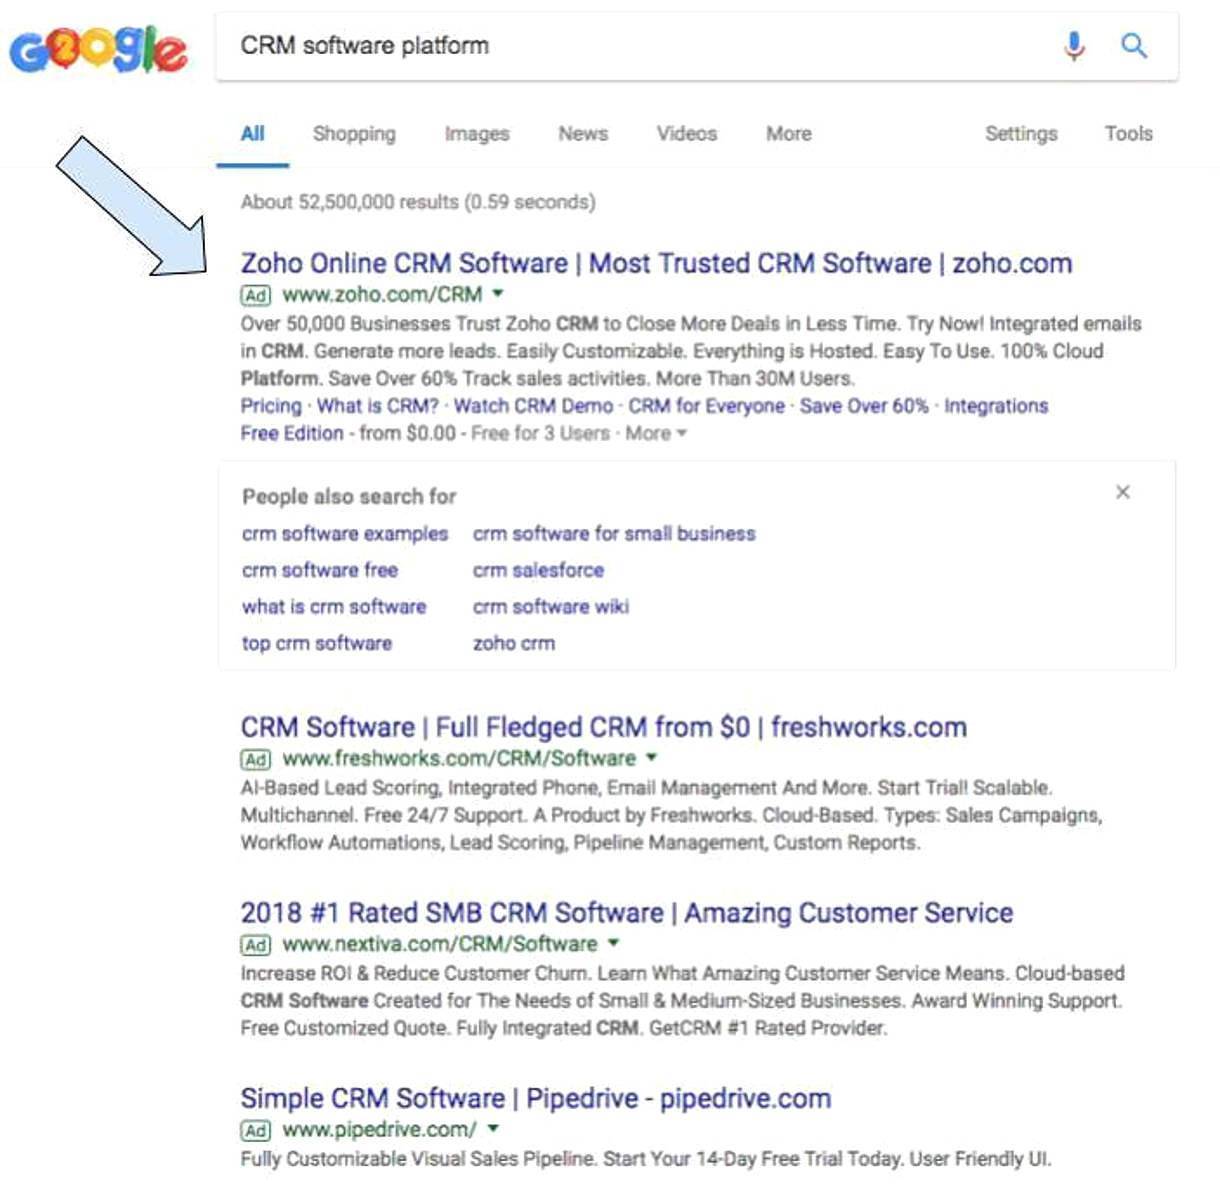 Zoho Search Results